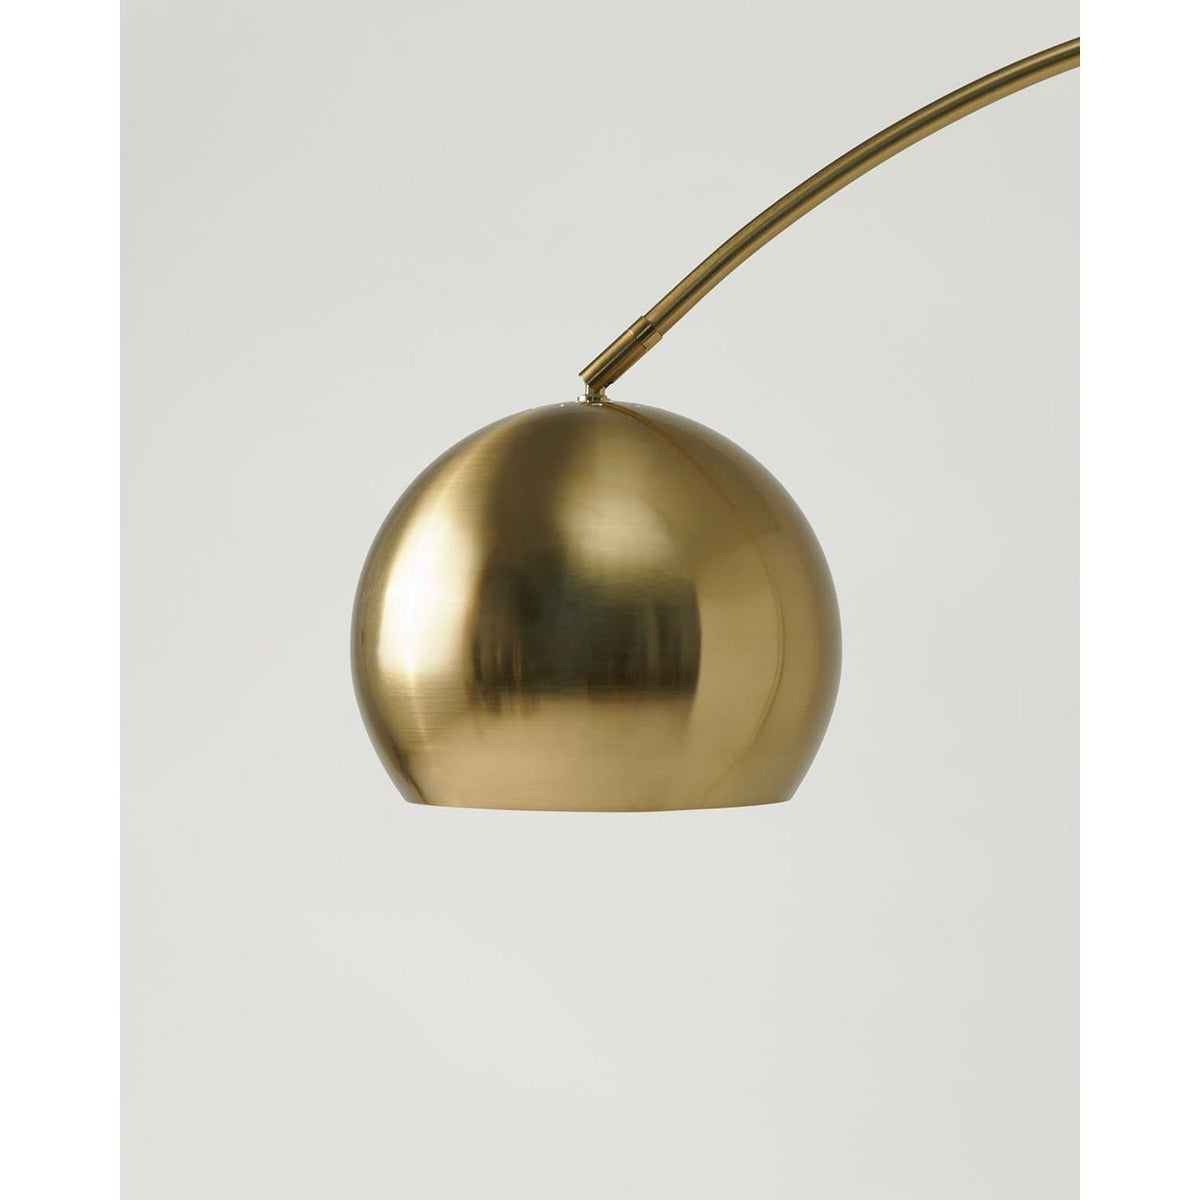 Olivia Floor Lamp by Brightech